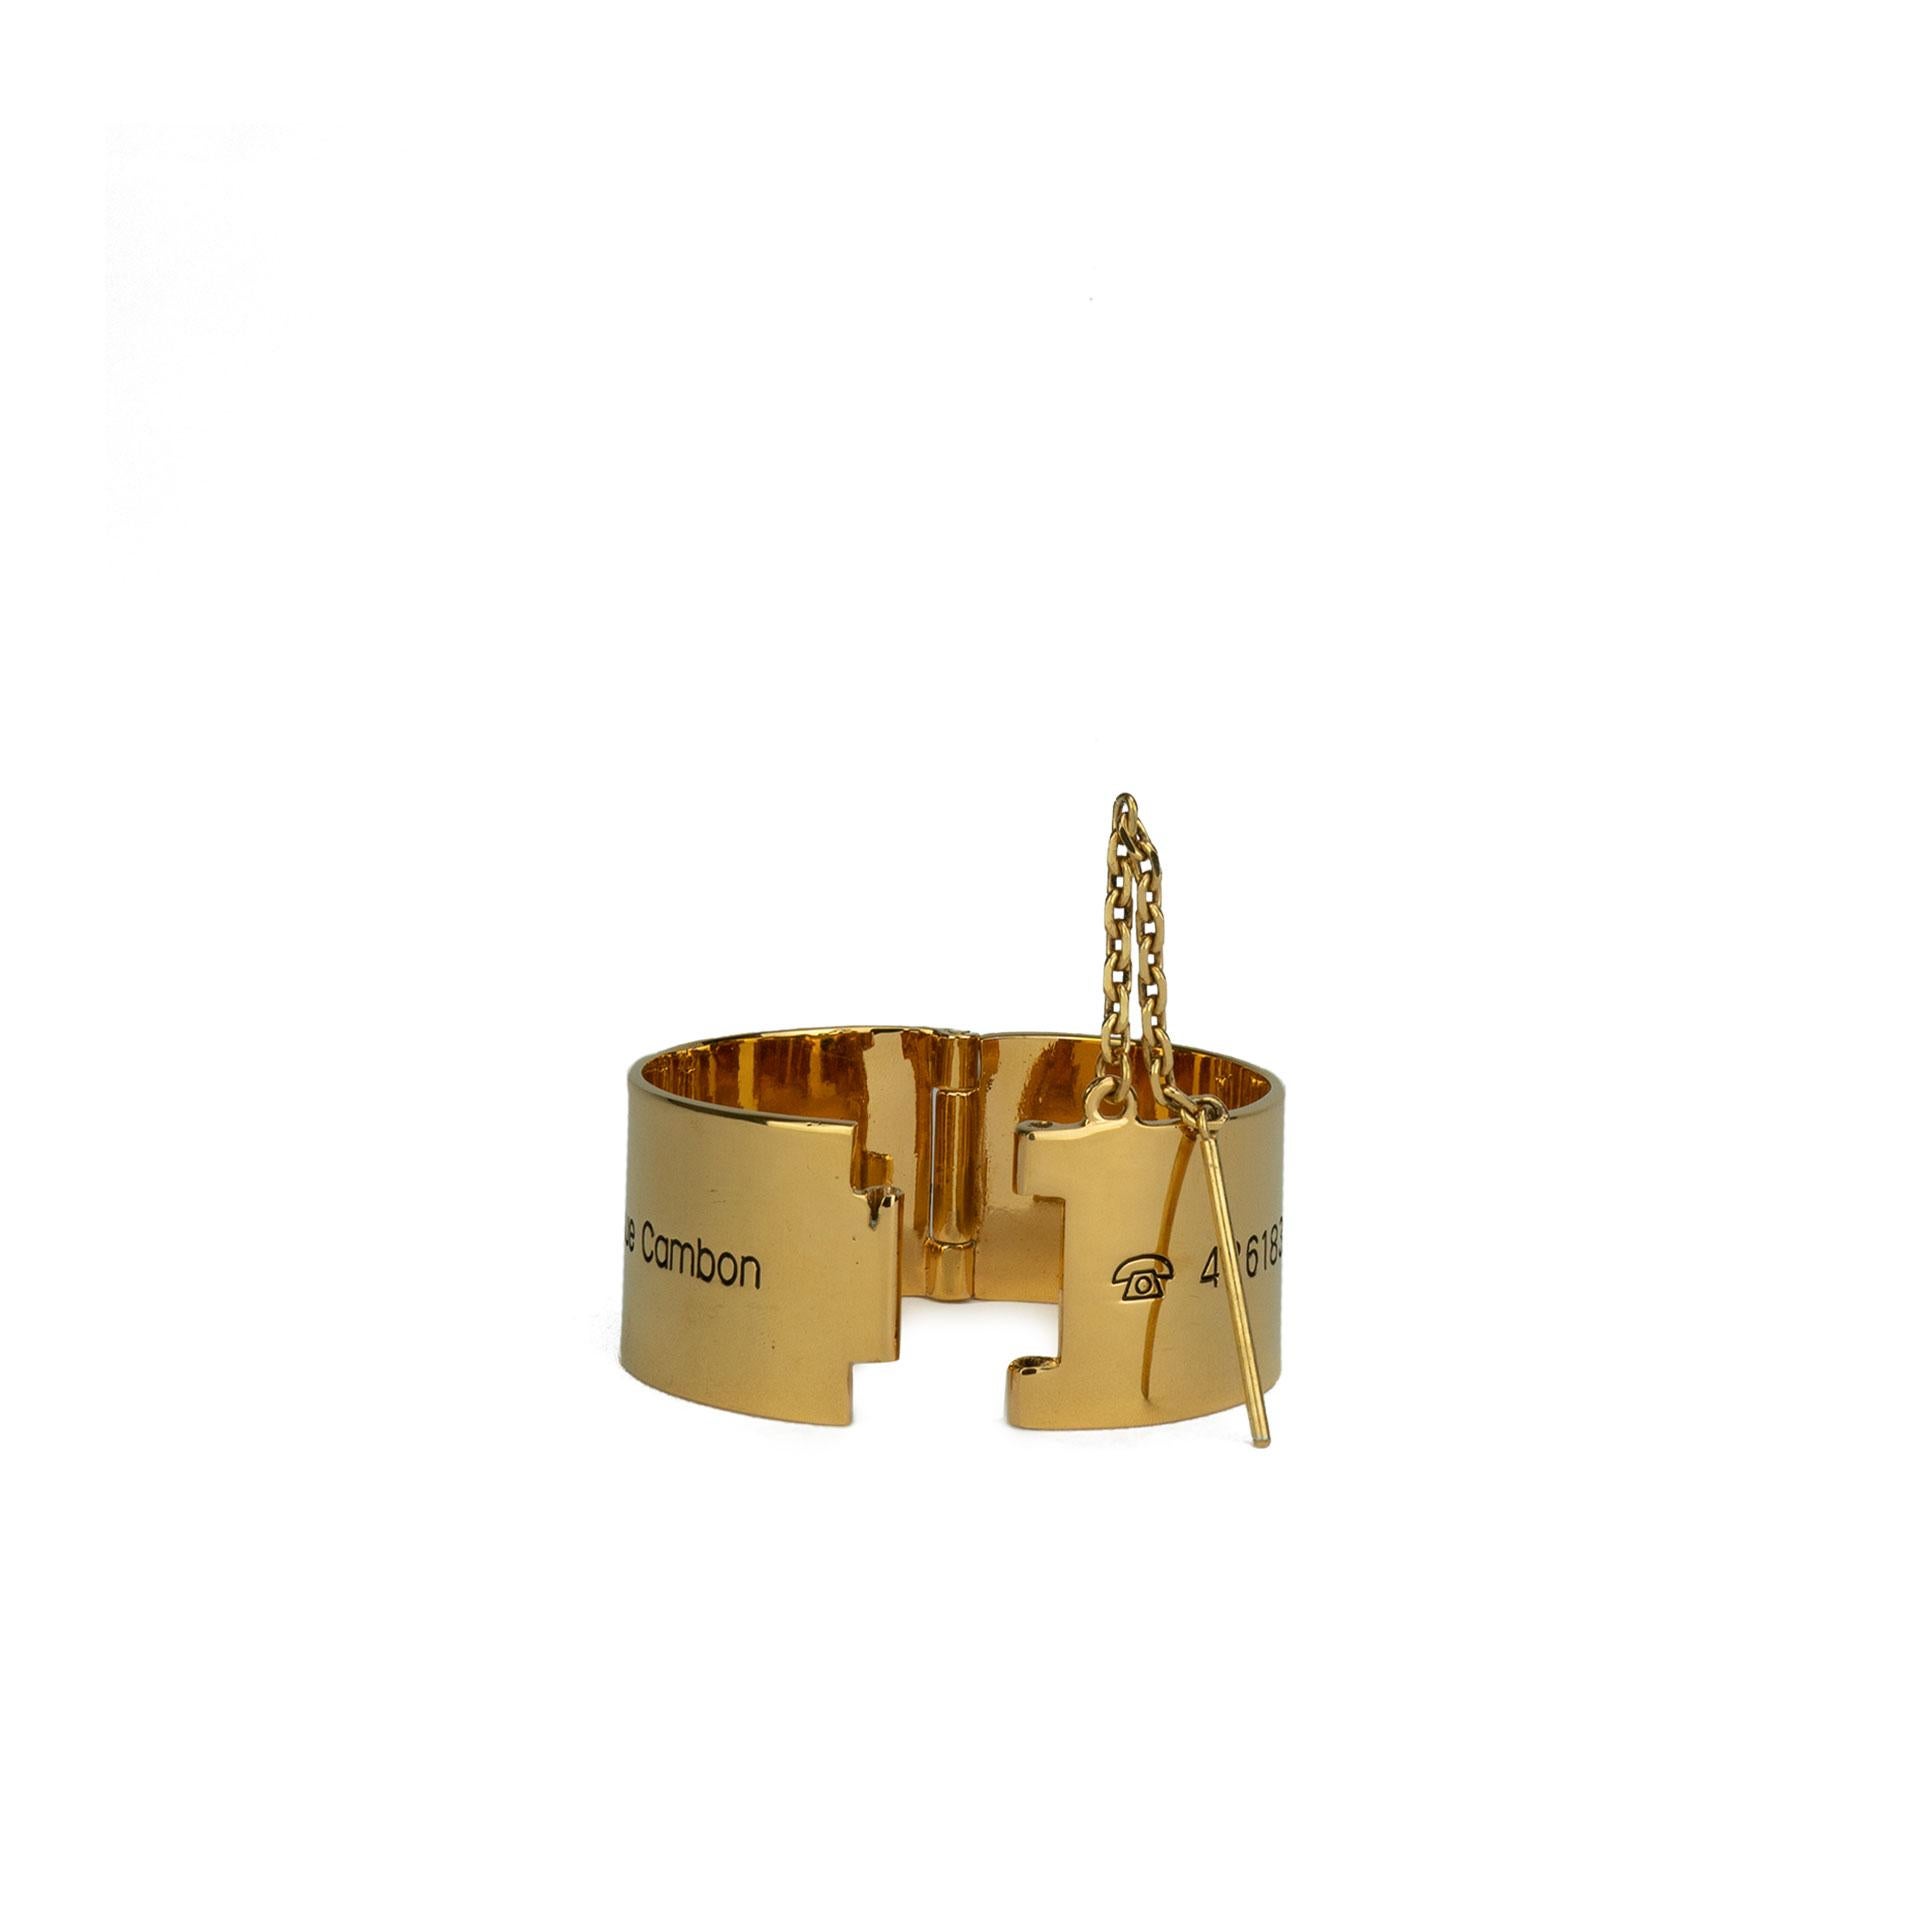 Chanel 31 Rue Cambon Cuff

Circa 1990s {VINTAGE 20 Years}
Gold plated 
31 Rue Cambon Address & Telex Engraved 
Pin closure
7.75